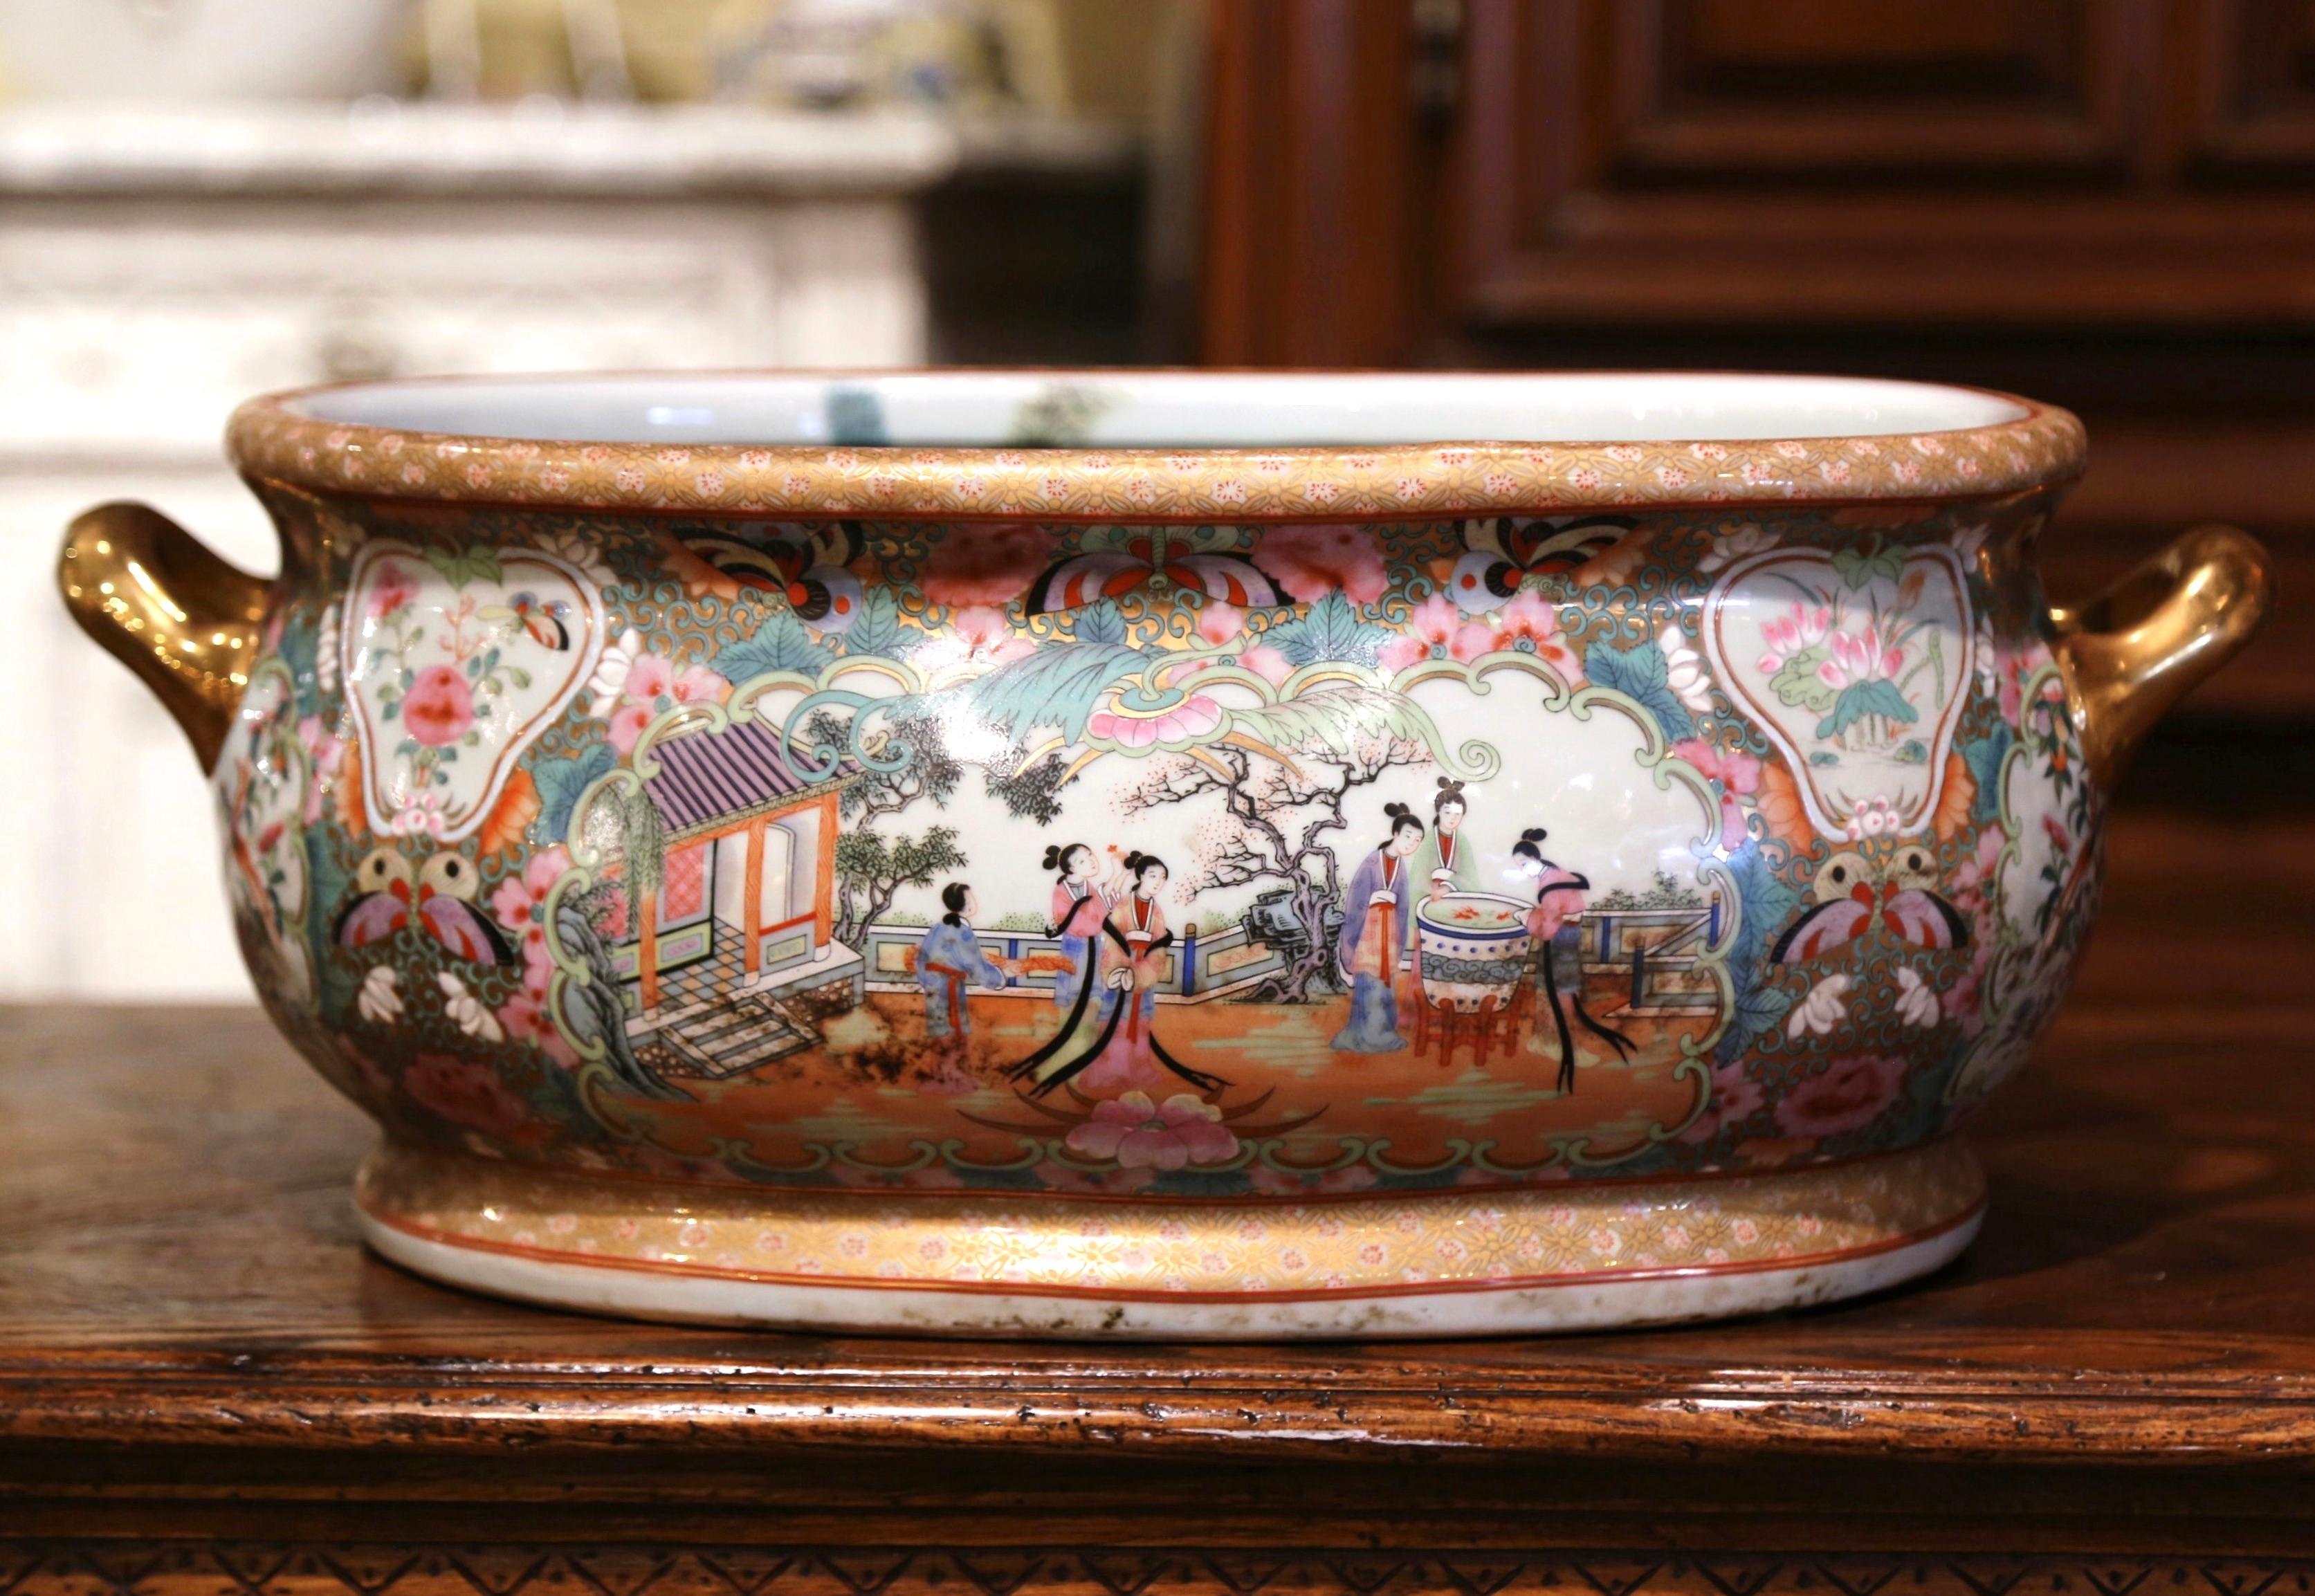 Crafted in Japan circa 1920 and oval in shape, the colorful porcelain basin with two side gilt handles bowl is hand painted with floral motifs including two medallions with Japanese people dressed in traditional clothing; the large bowl is further